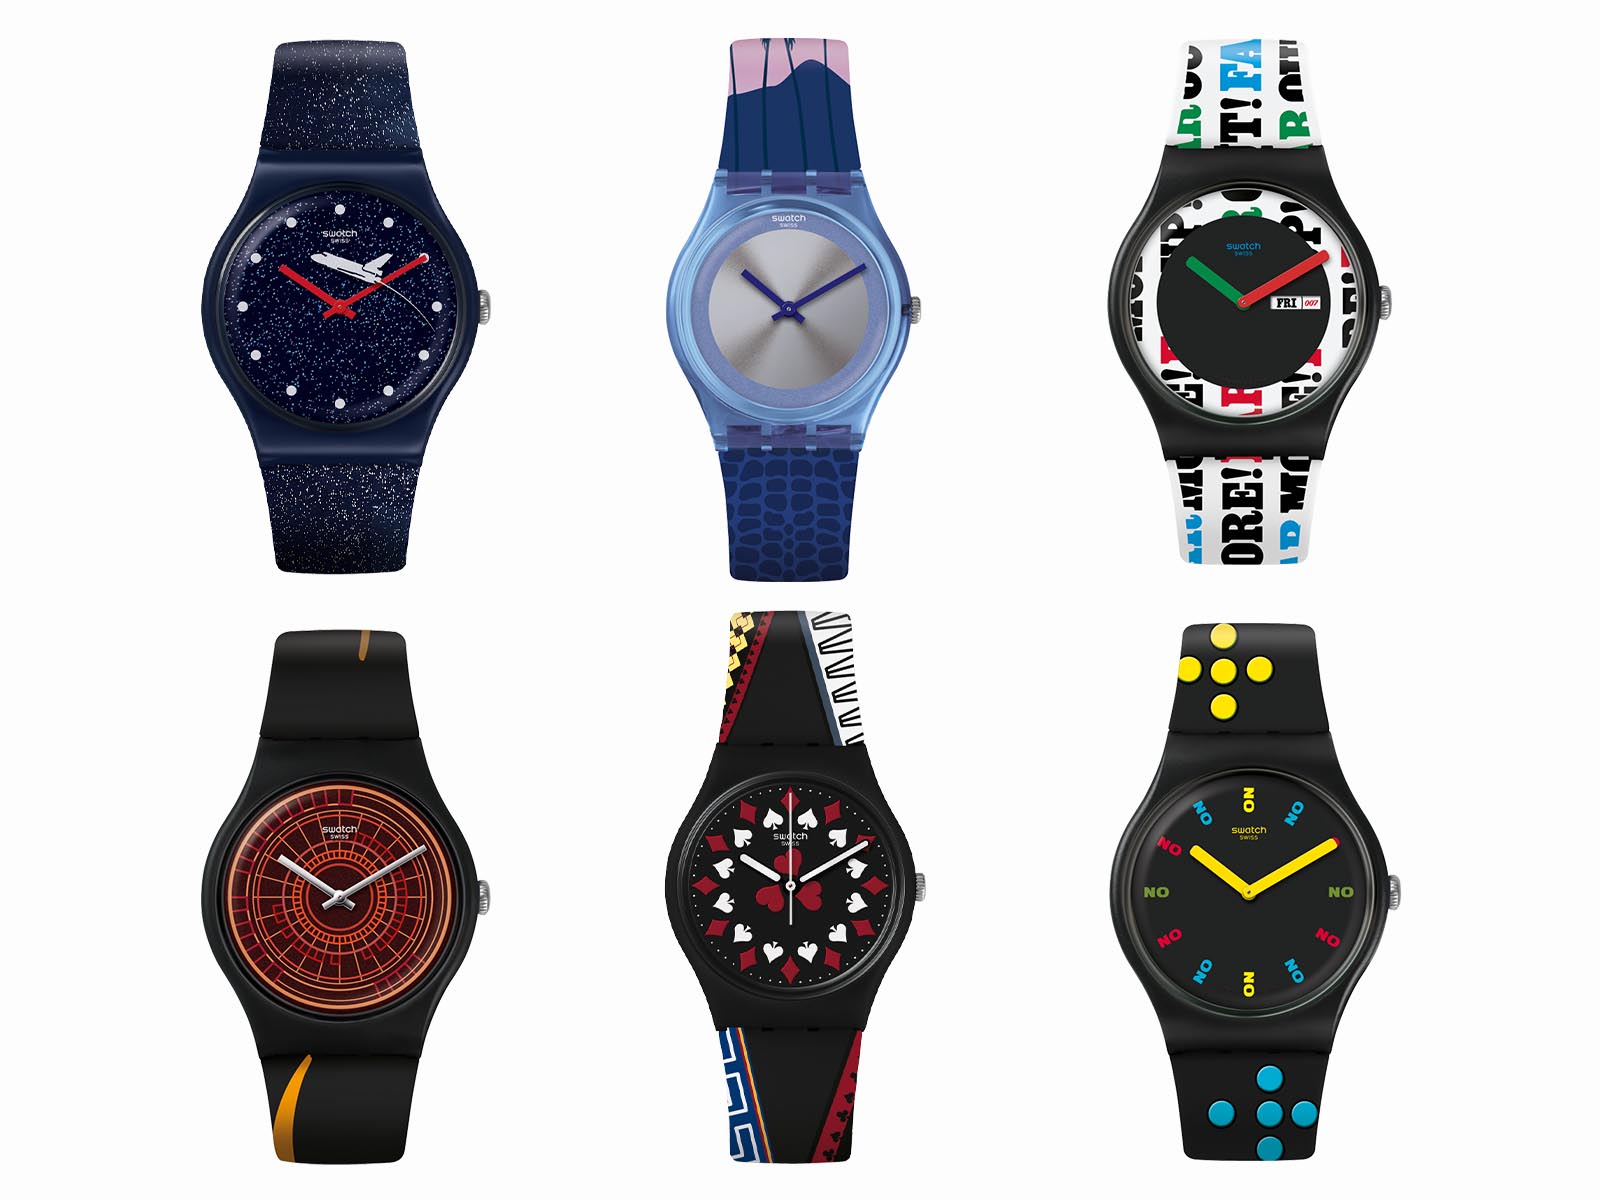 james bond watch collection